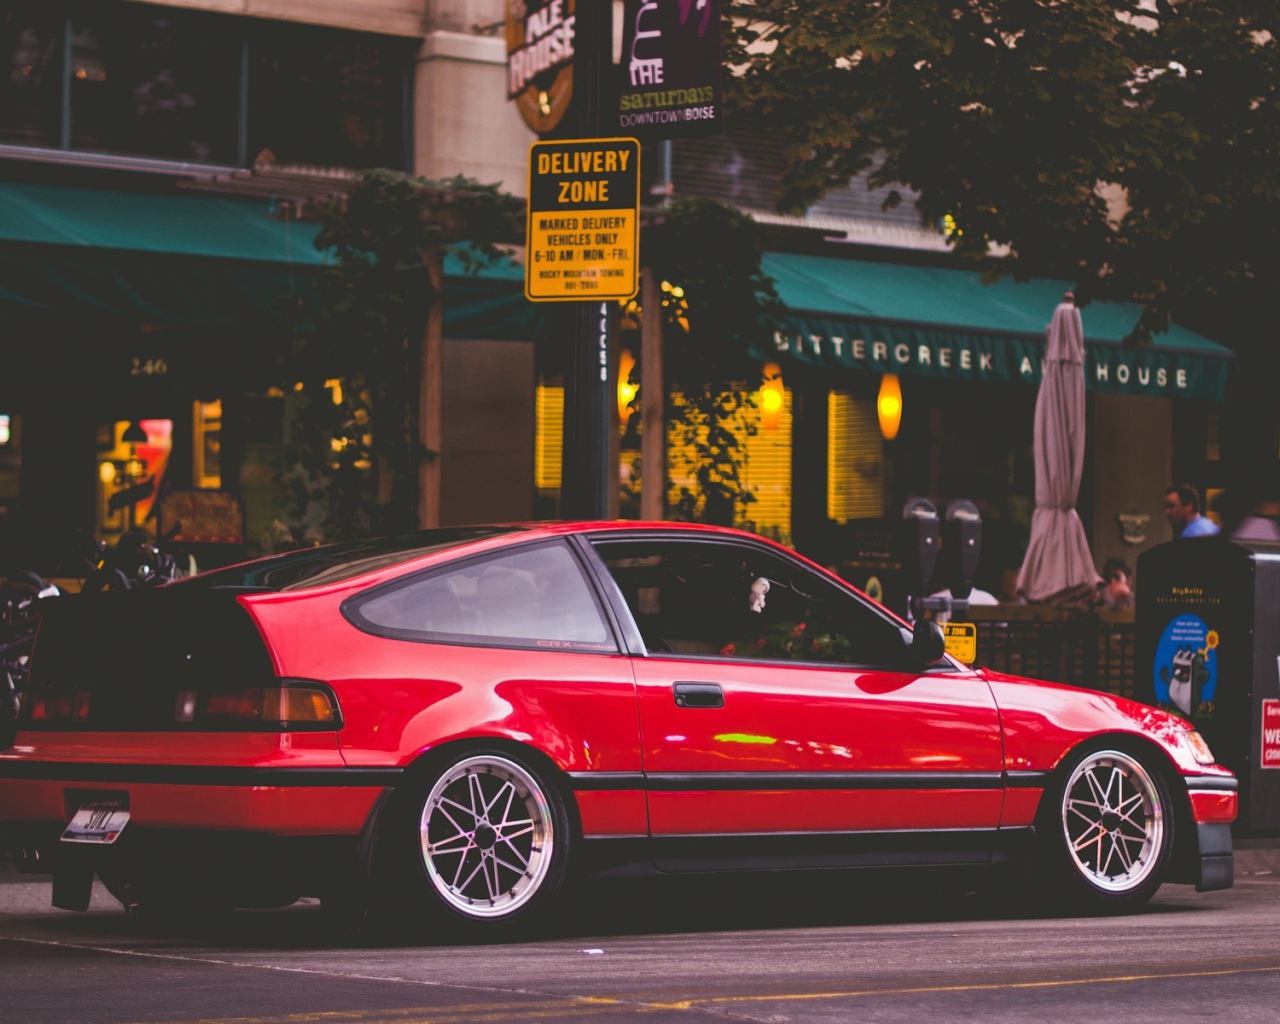 Red Honda CRX is standing at a street cafe